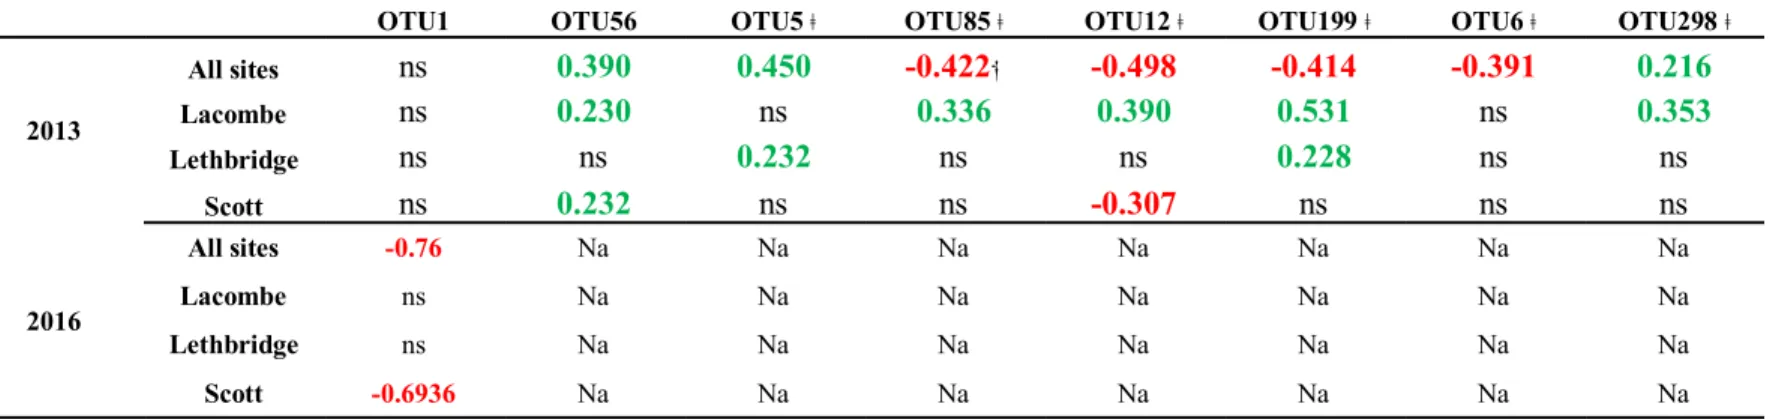 Table 6. Spearman’s Correlations coefficients (R) of the correlation between canola yield and the relative abundancy the hub  taxa plus OTU56 and OTU1, per site and year, α = 0.05